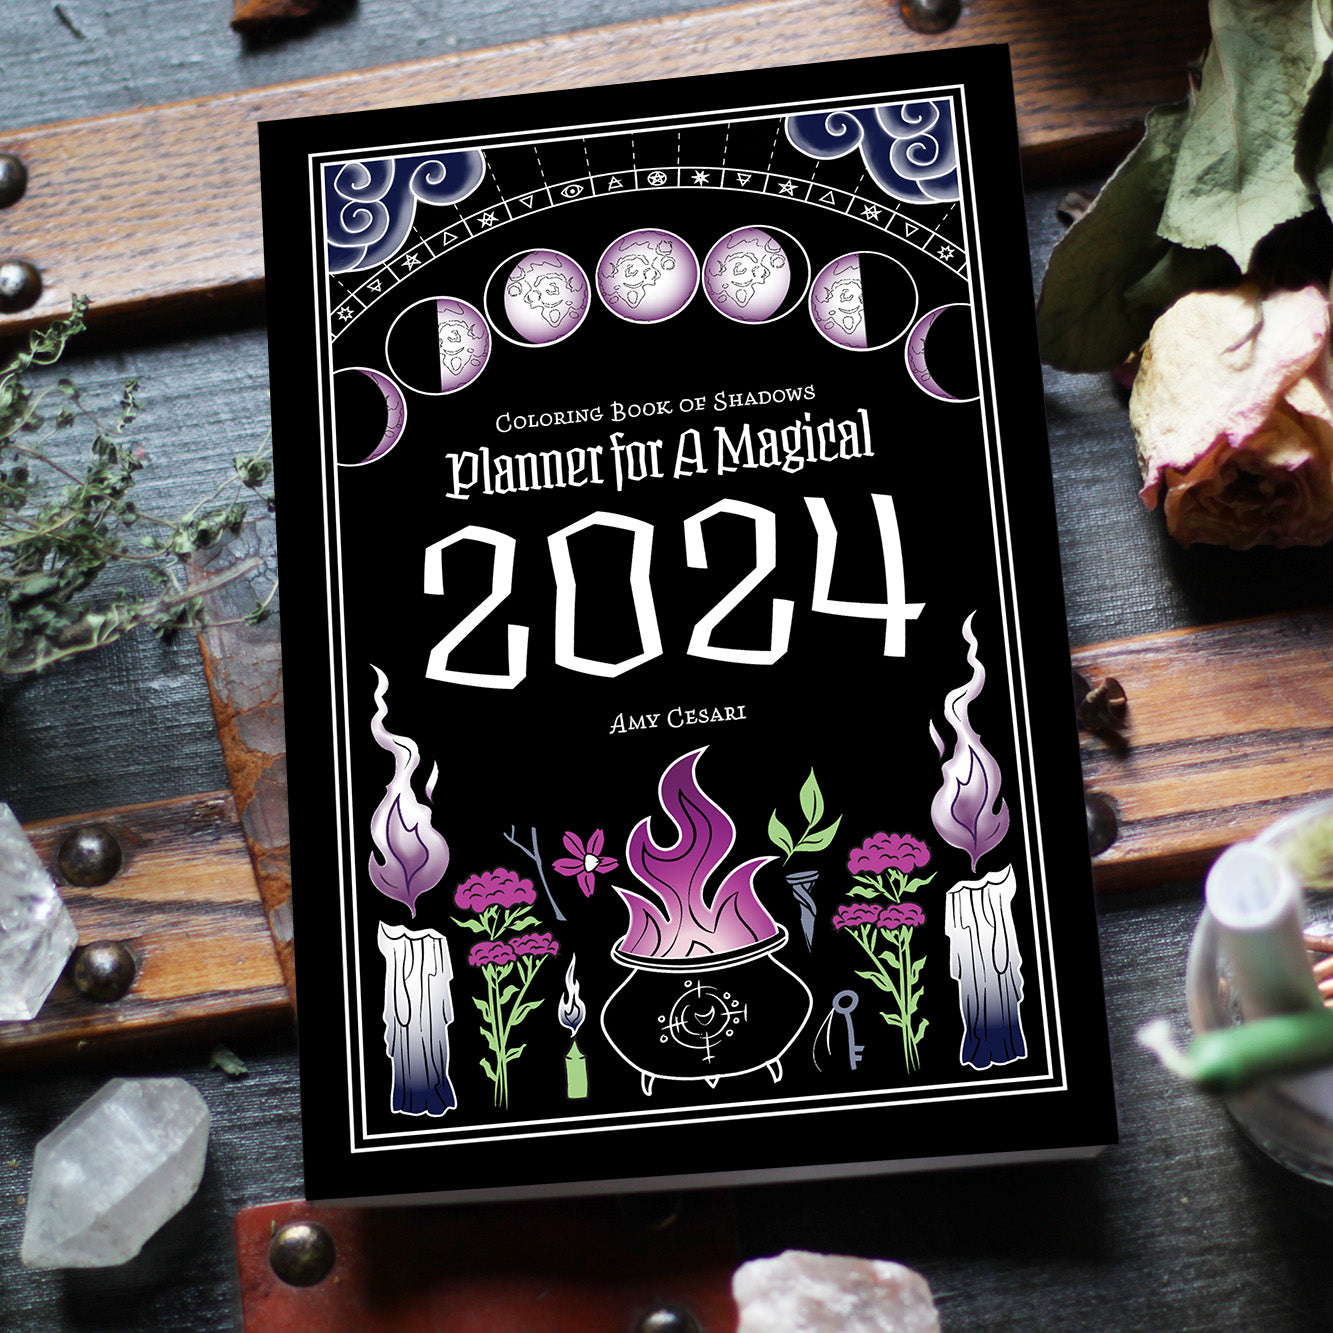 Coloring Book of Shadows: Planner for a Magical 2024 (Instant